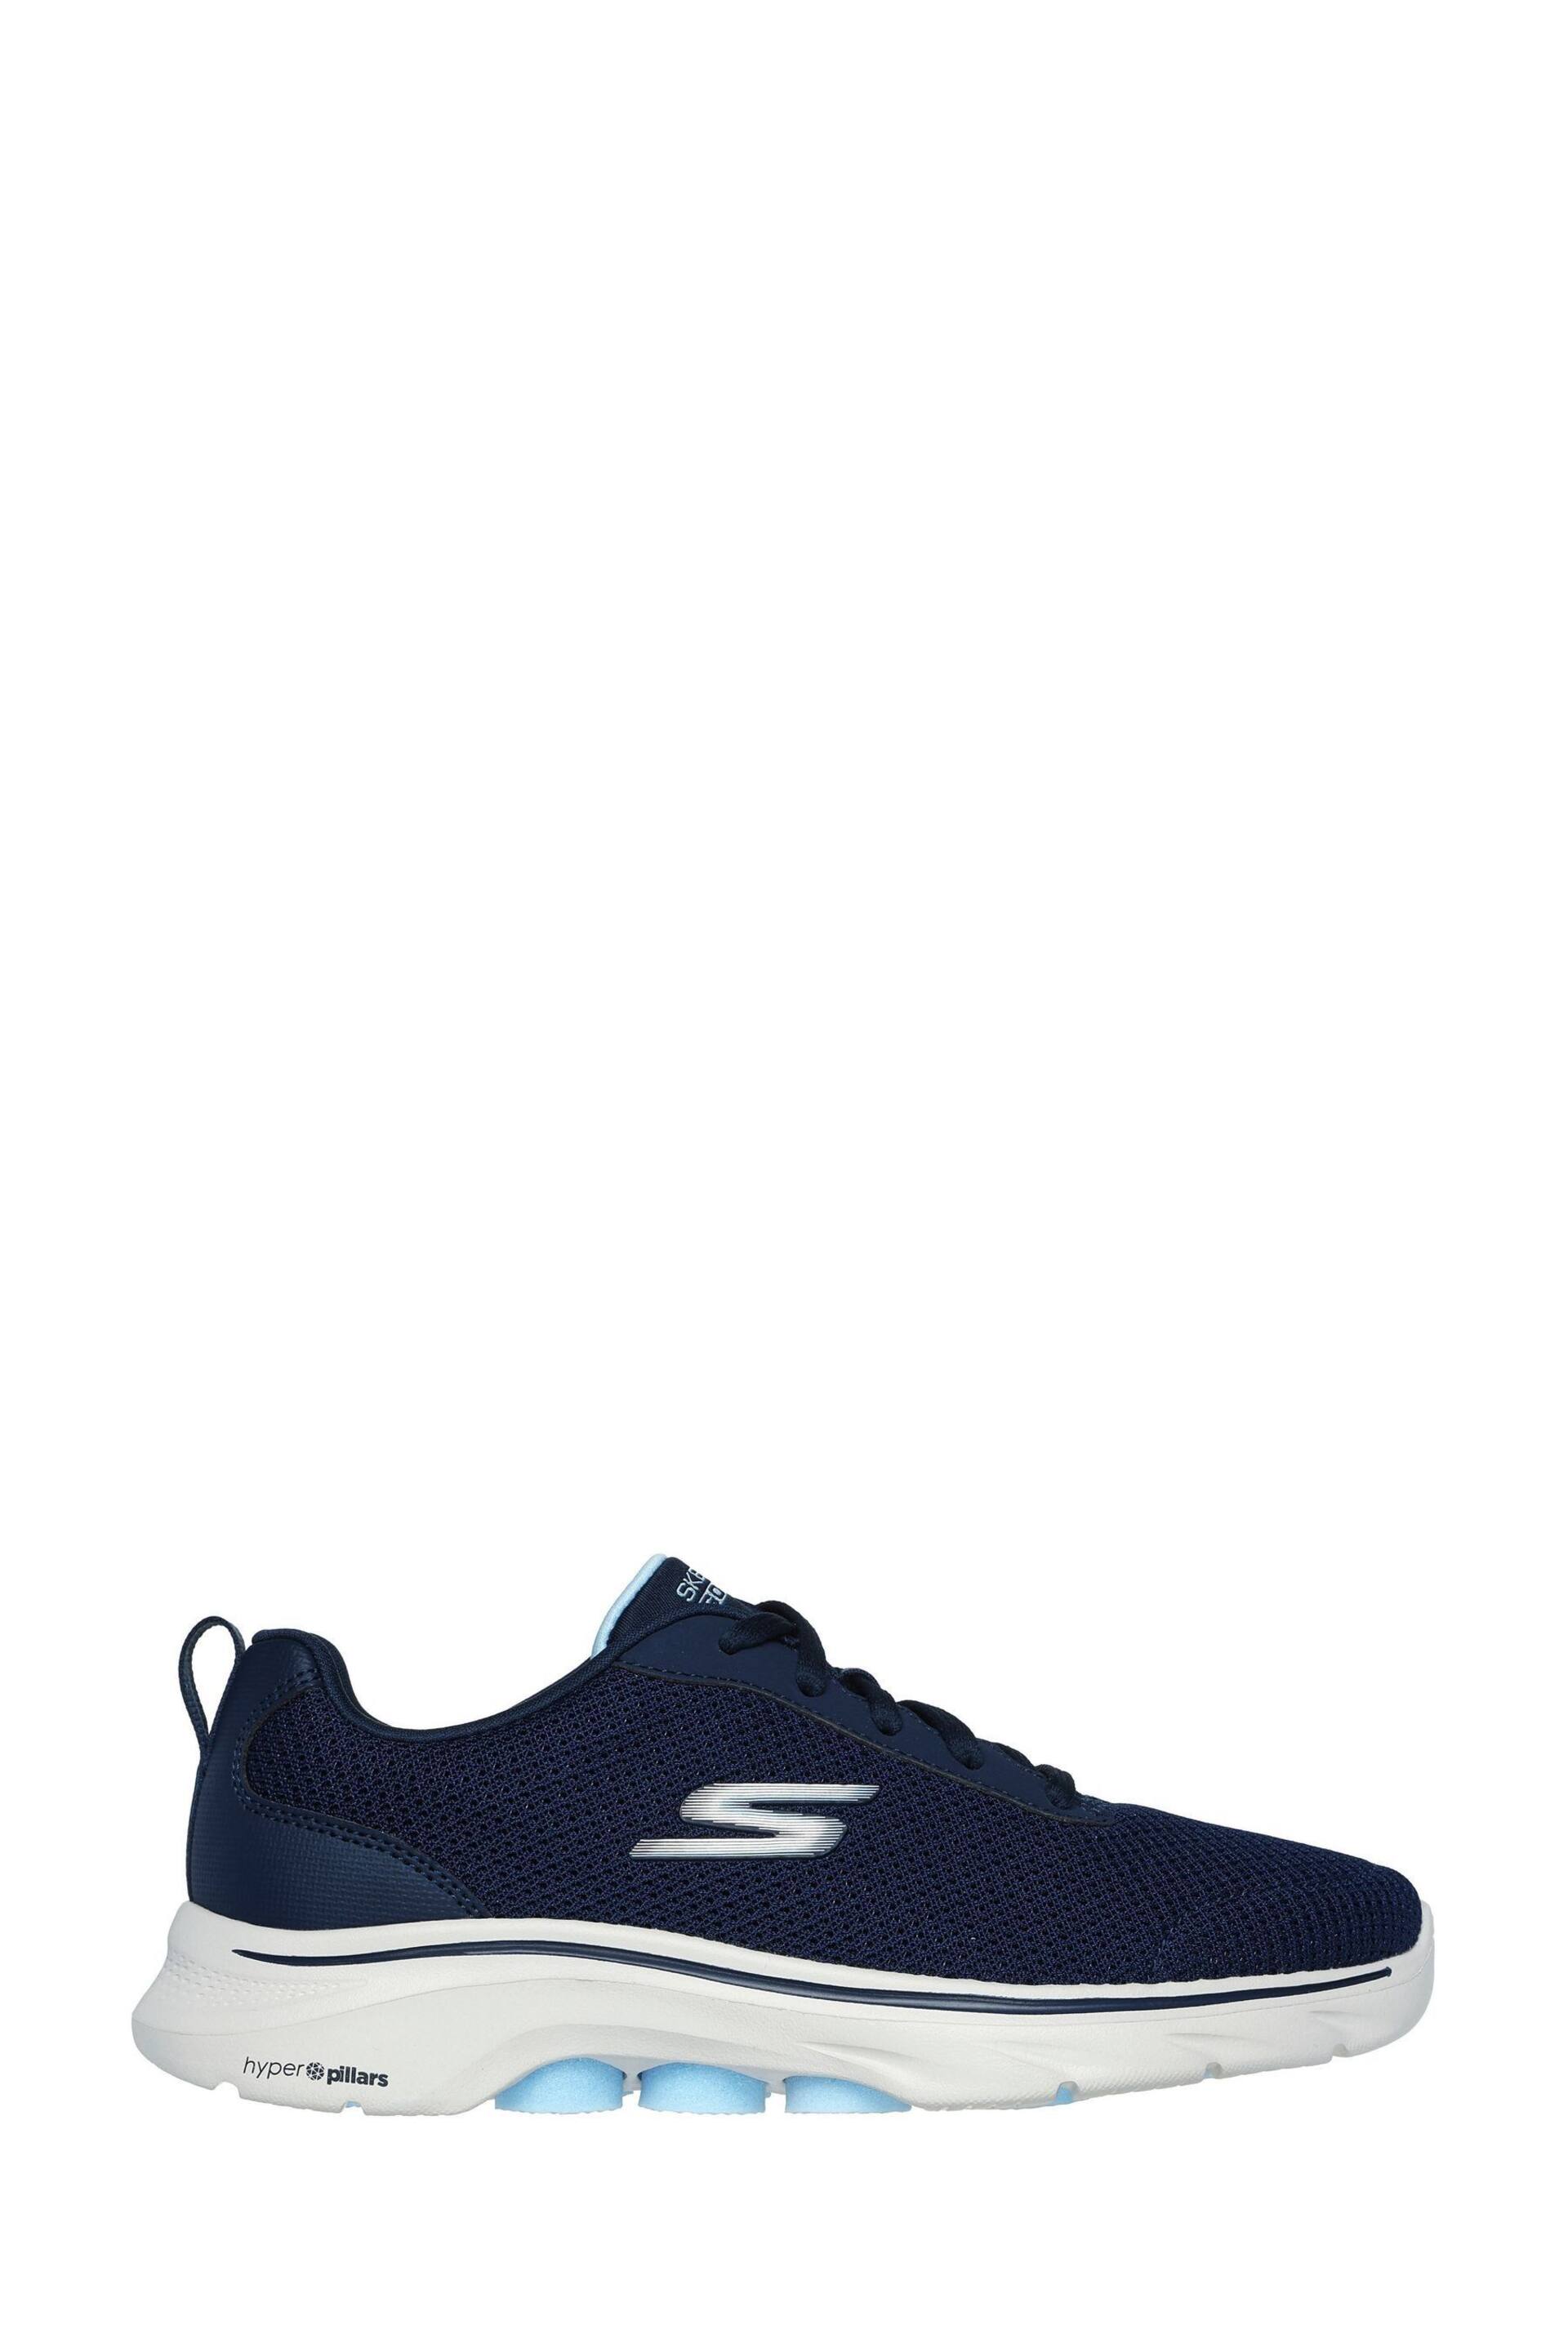 Skechers Blue Go Walk 7 Clear Path Trainers - Image 1 of 5